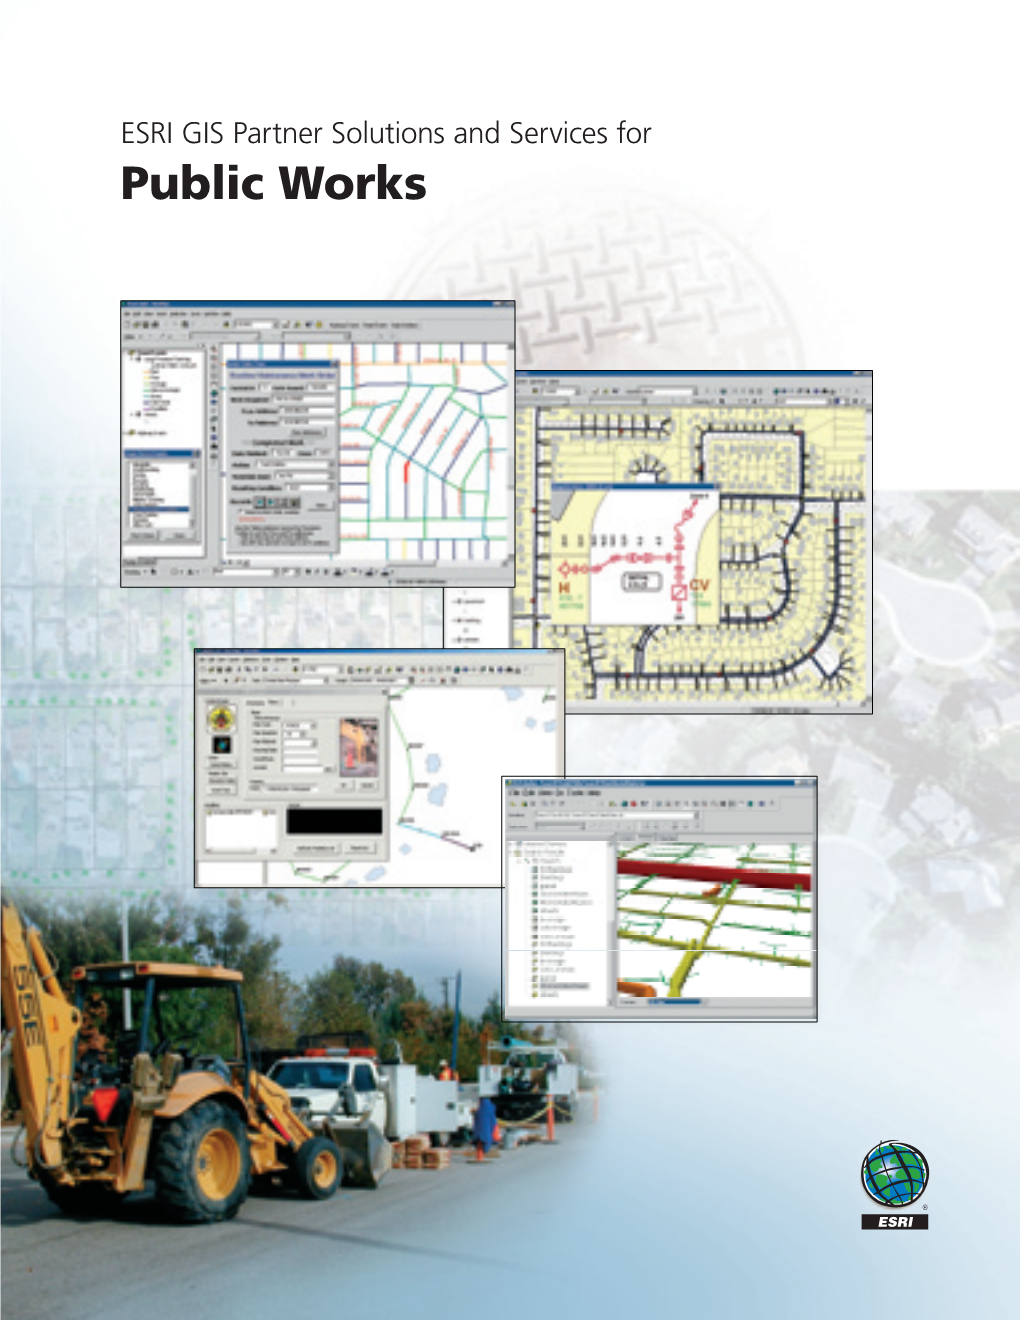 ESRI GIS Partner Solutions and Services for Public Works